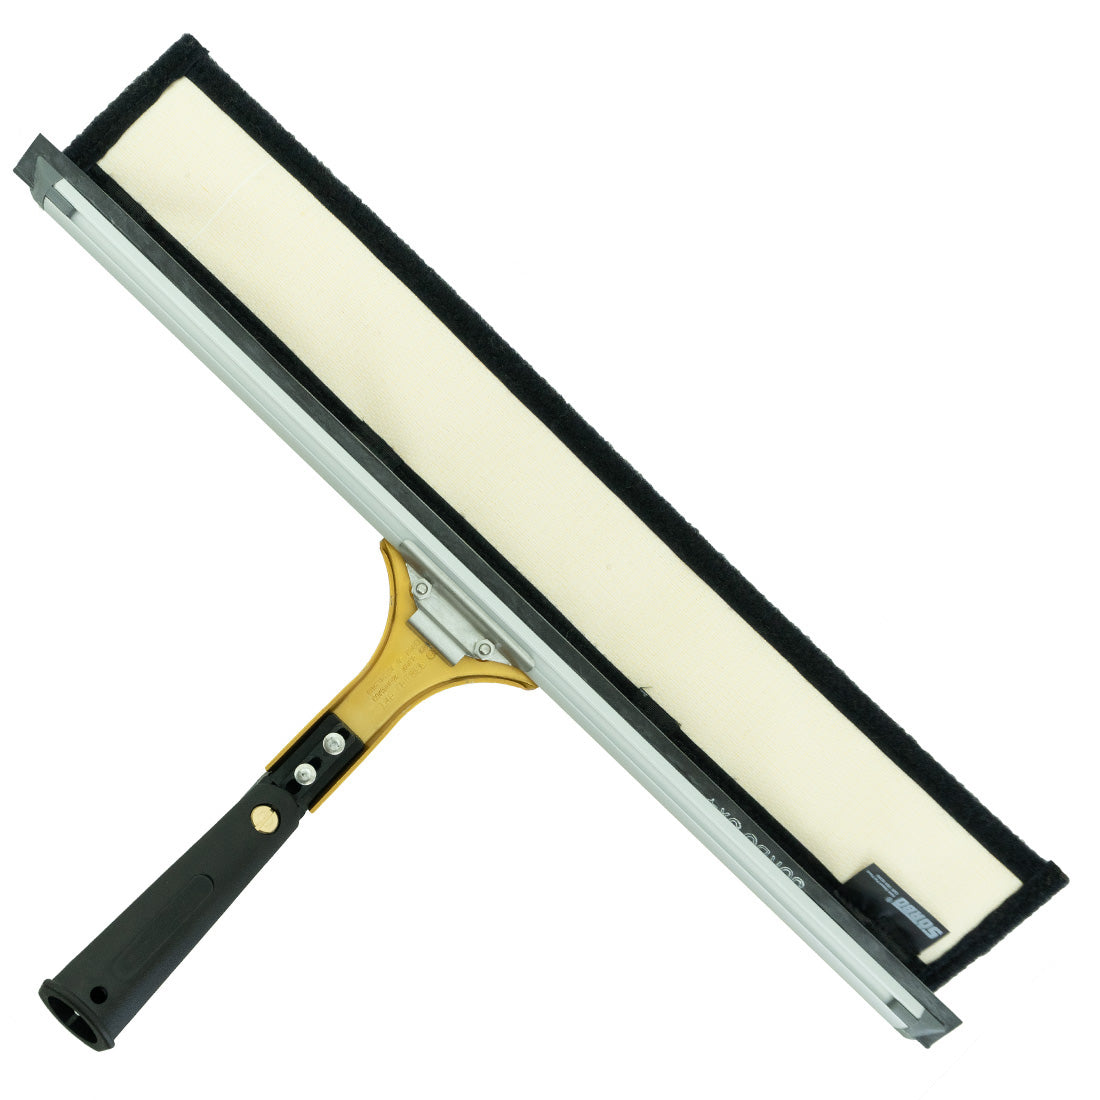 Ettore Acrylic Squeegee Rubber Window Squeegee in the Squeegees